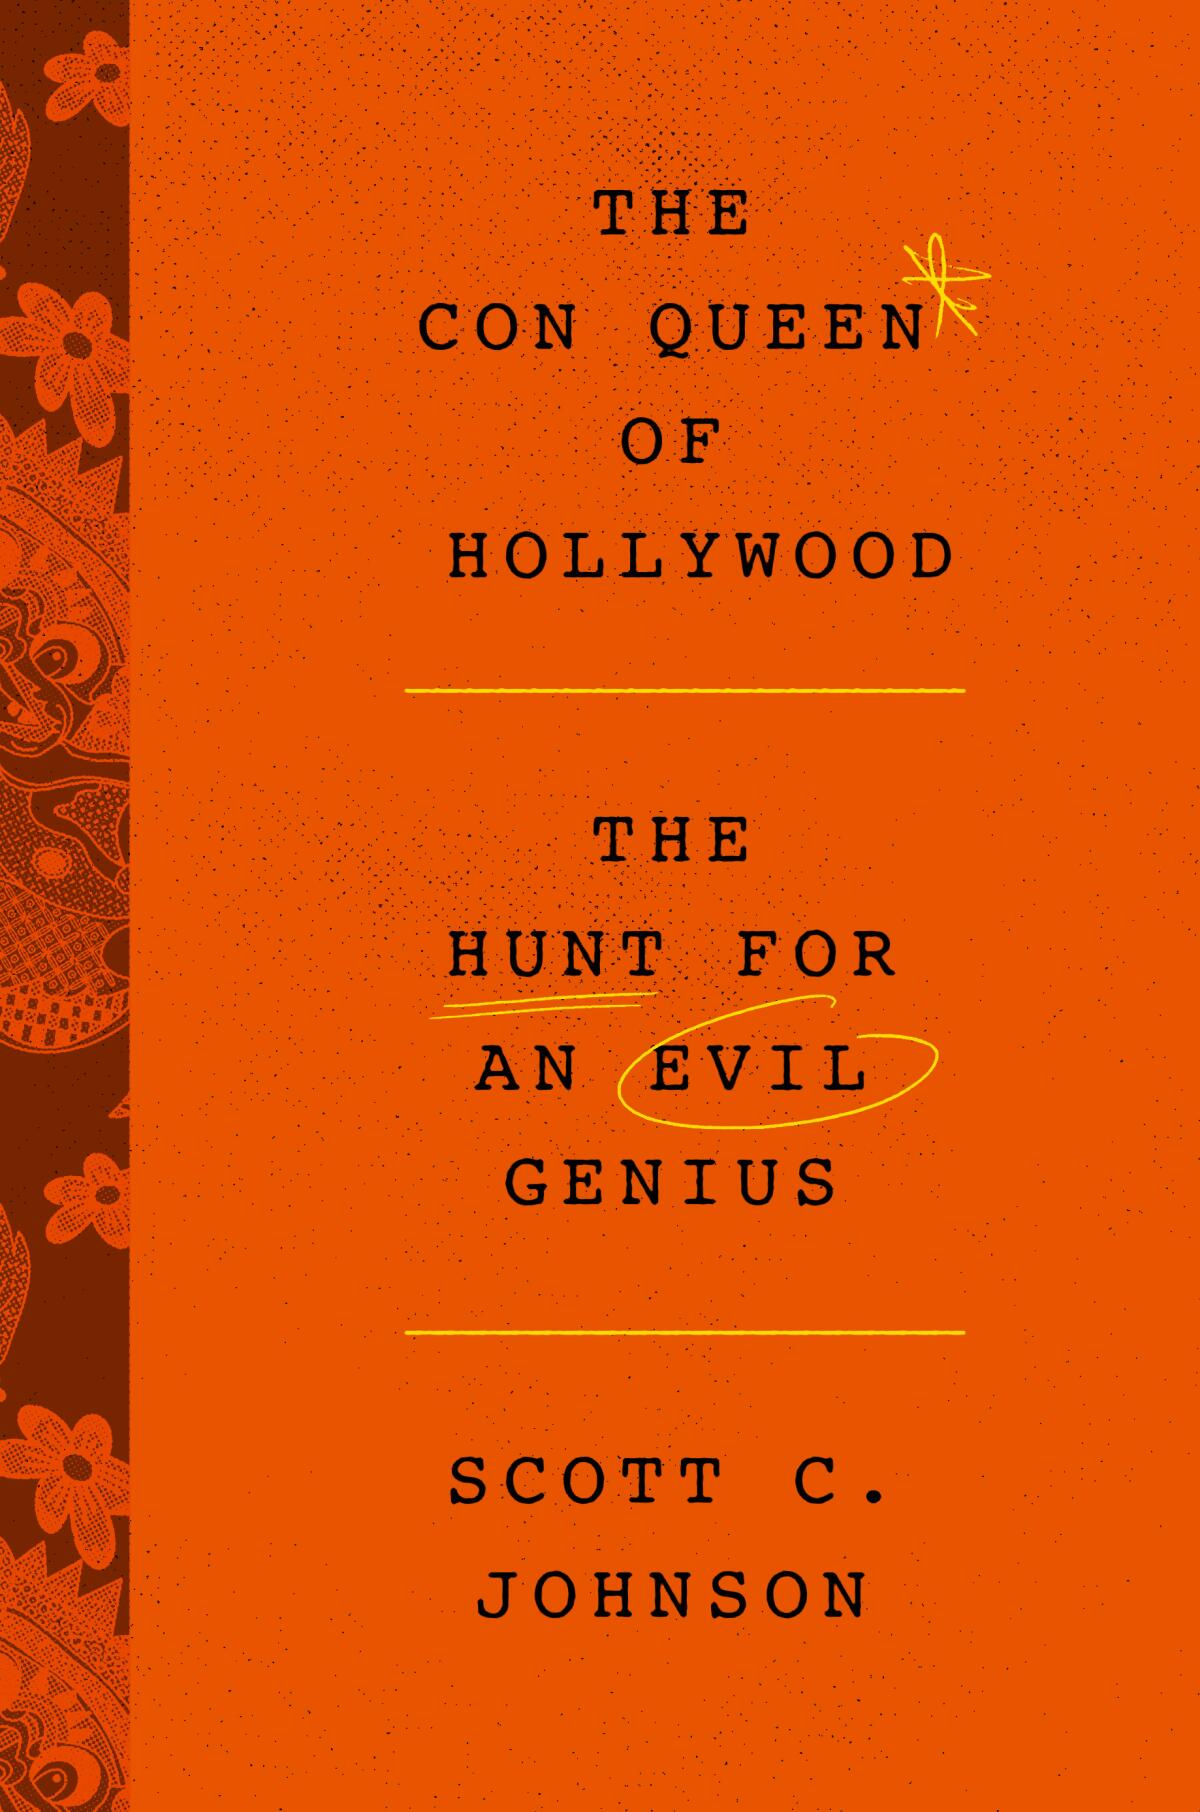 the cover of 'The Con Queen of Hollywood' by Scott C. Johnson